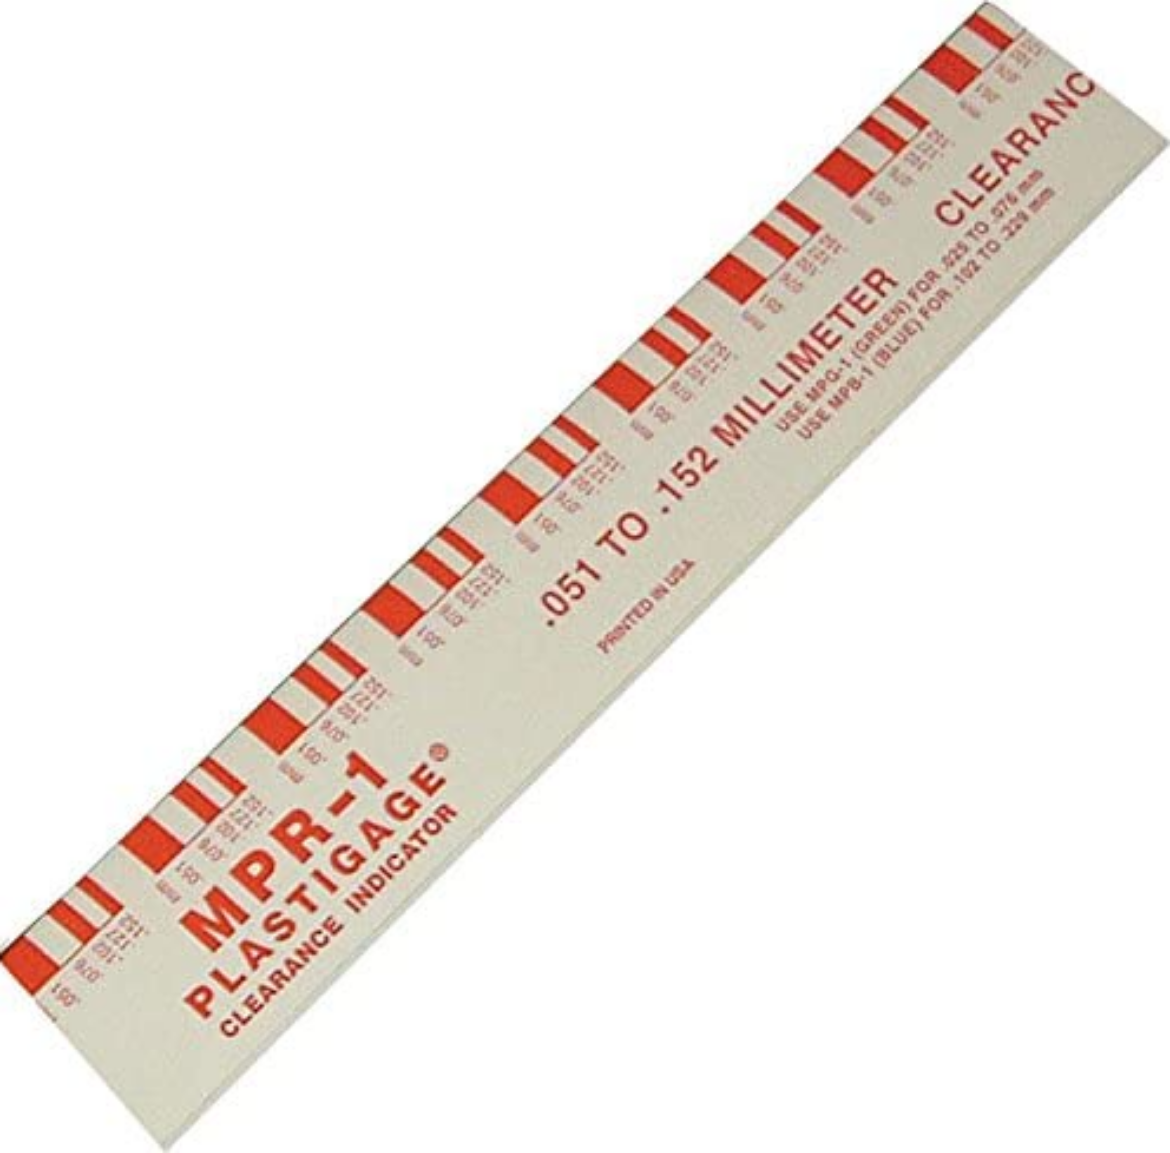 https://www.thebossshop.com.au/images/thumbs/0004014_flexigauge-plastigauge-ar-1-red-bearing-clearance-check-strips-002-006_1170.png